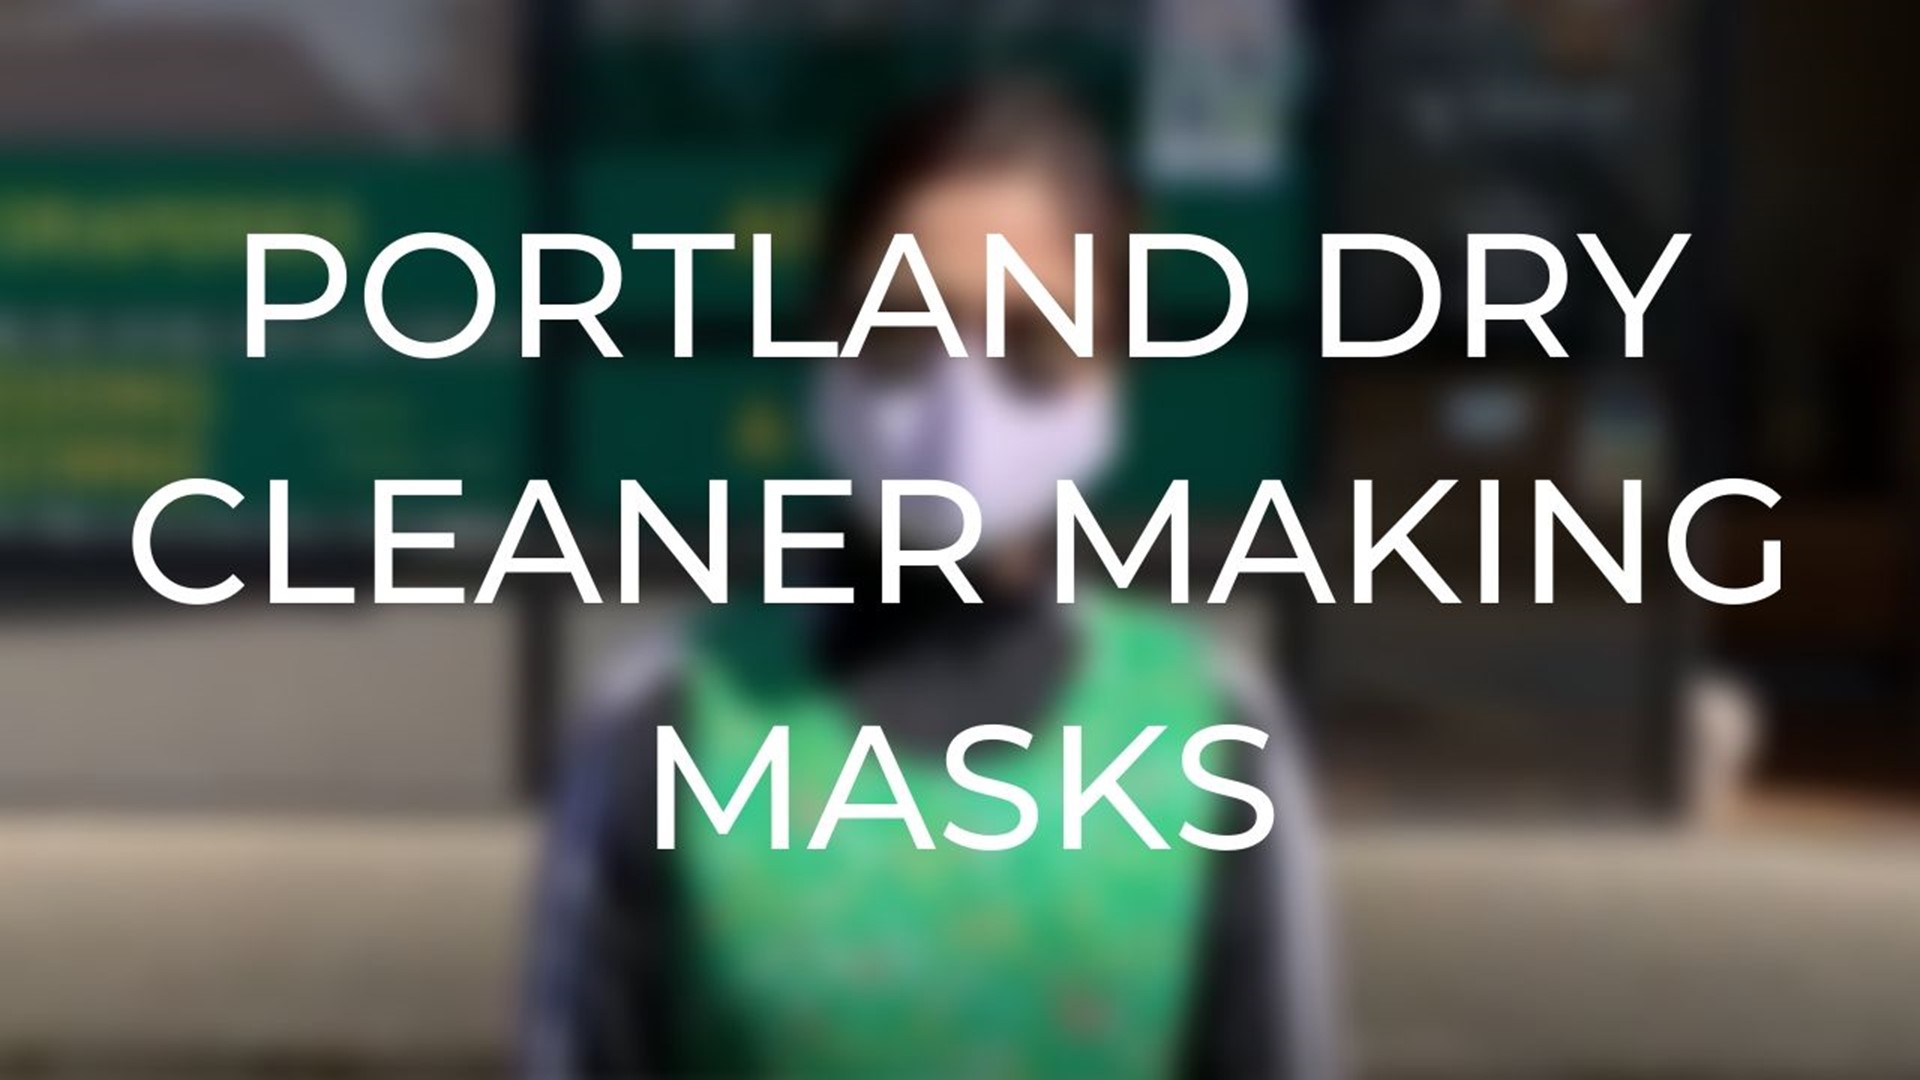 A Portland dry cleaner is making and selling masks to keep the business afloat.